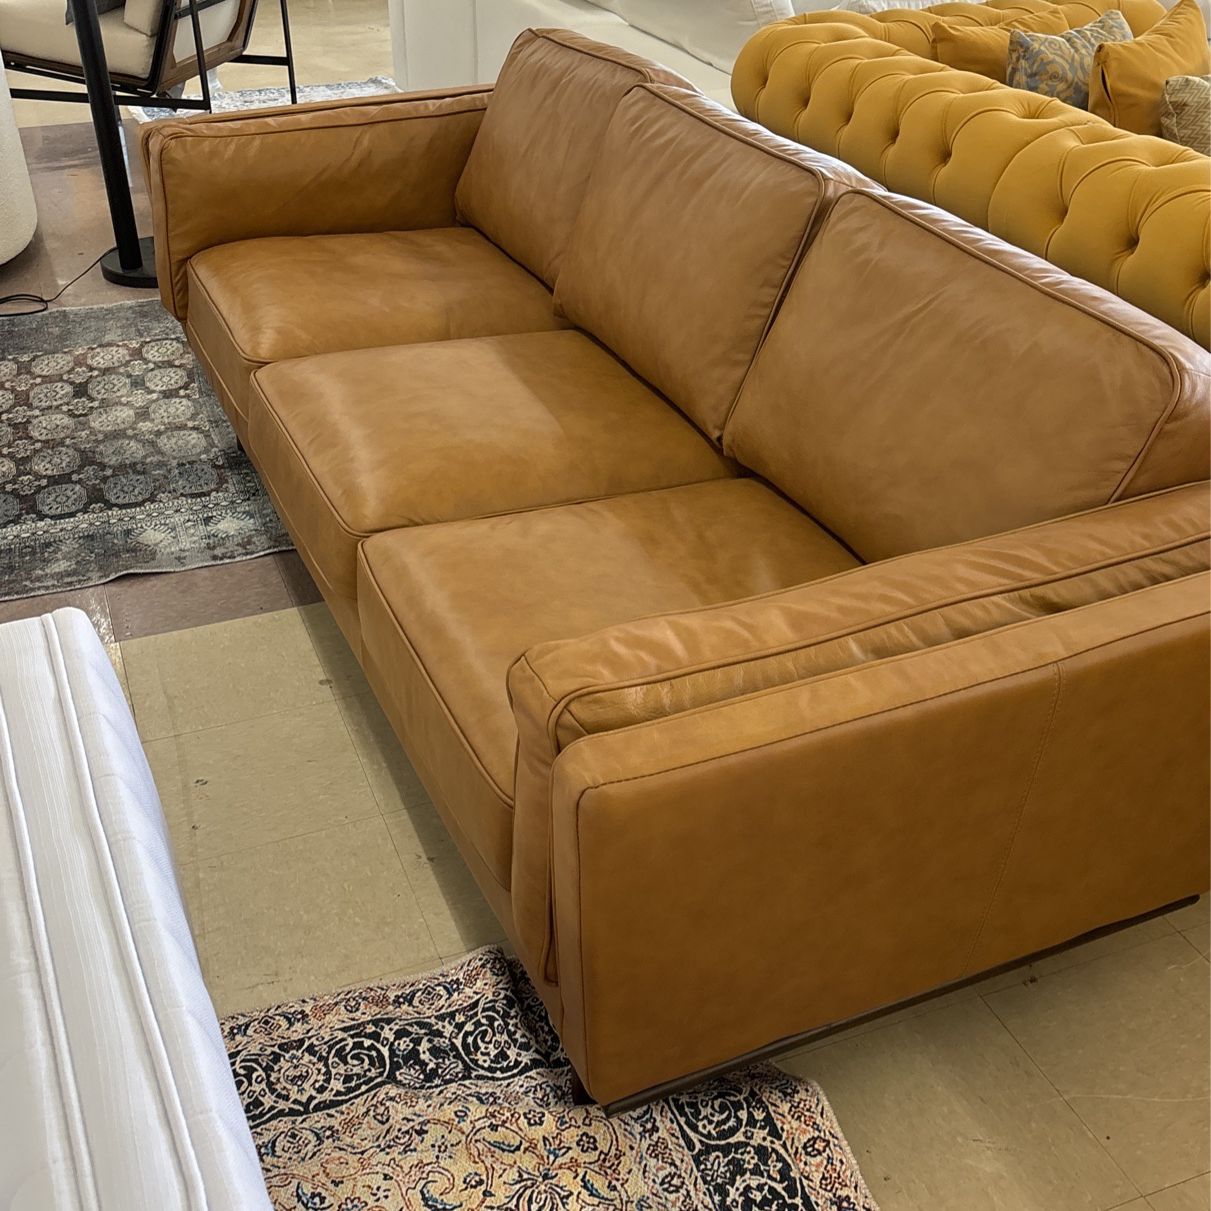 Geniune Leather Tan Sofa FREE Delivery ❤️🙈🥰❤️🤓